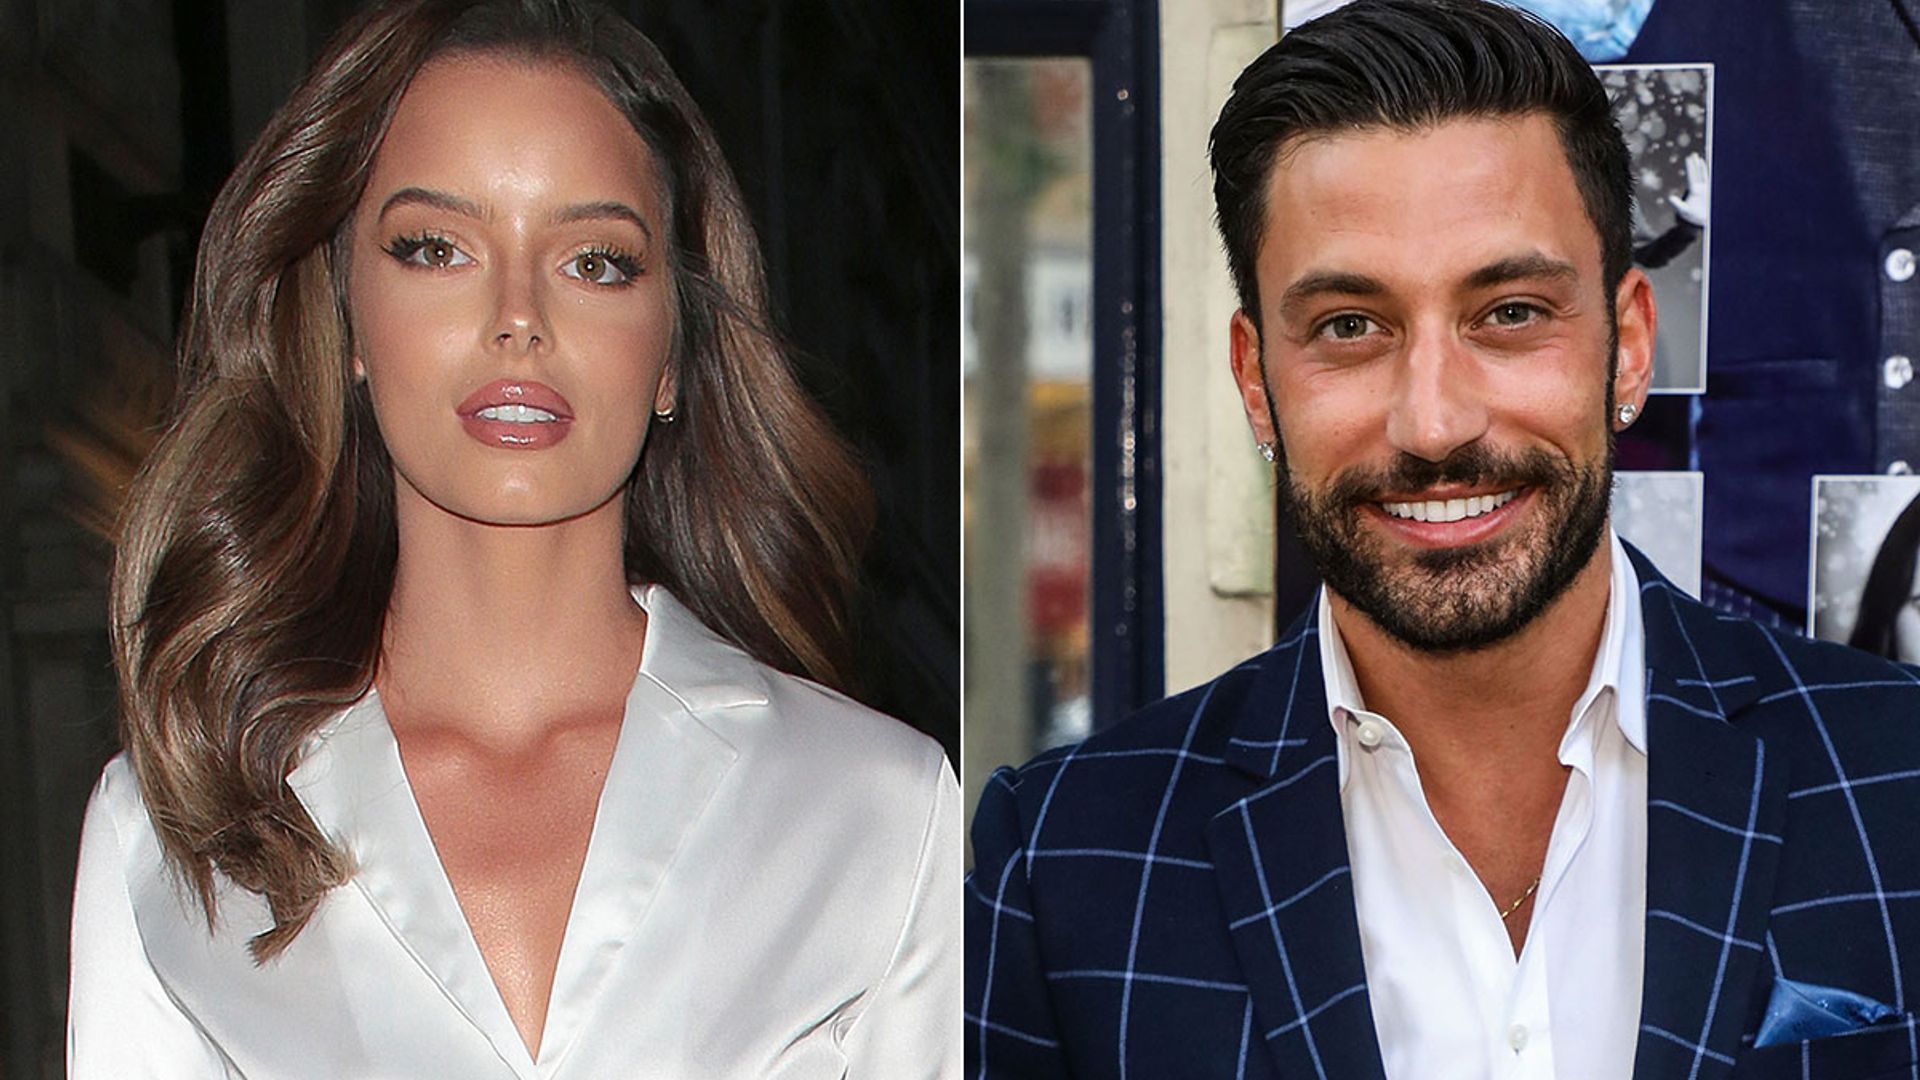 Maura Higgins goes Instagram official with new Strictly boyfriend Giovanni Pernice